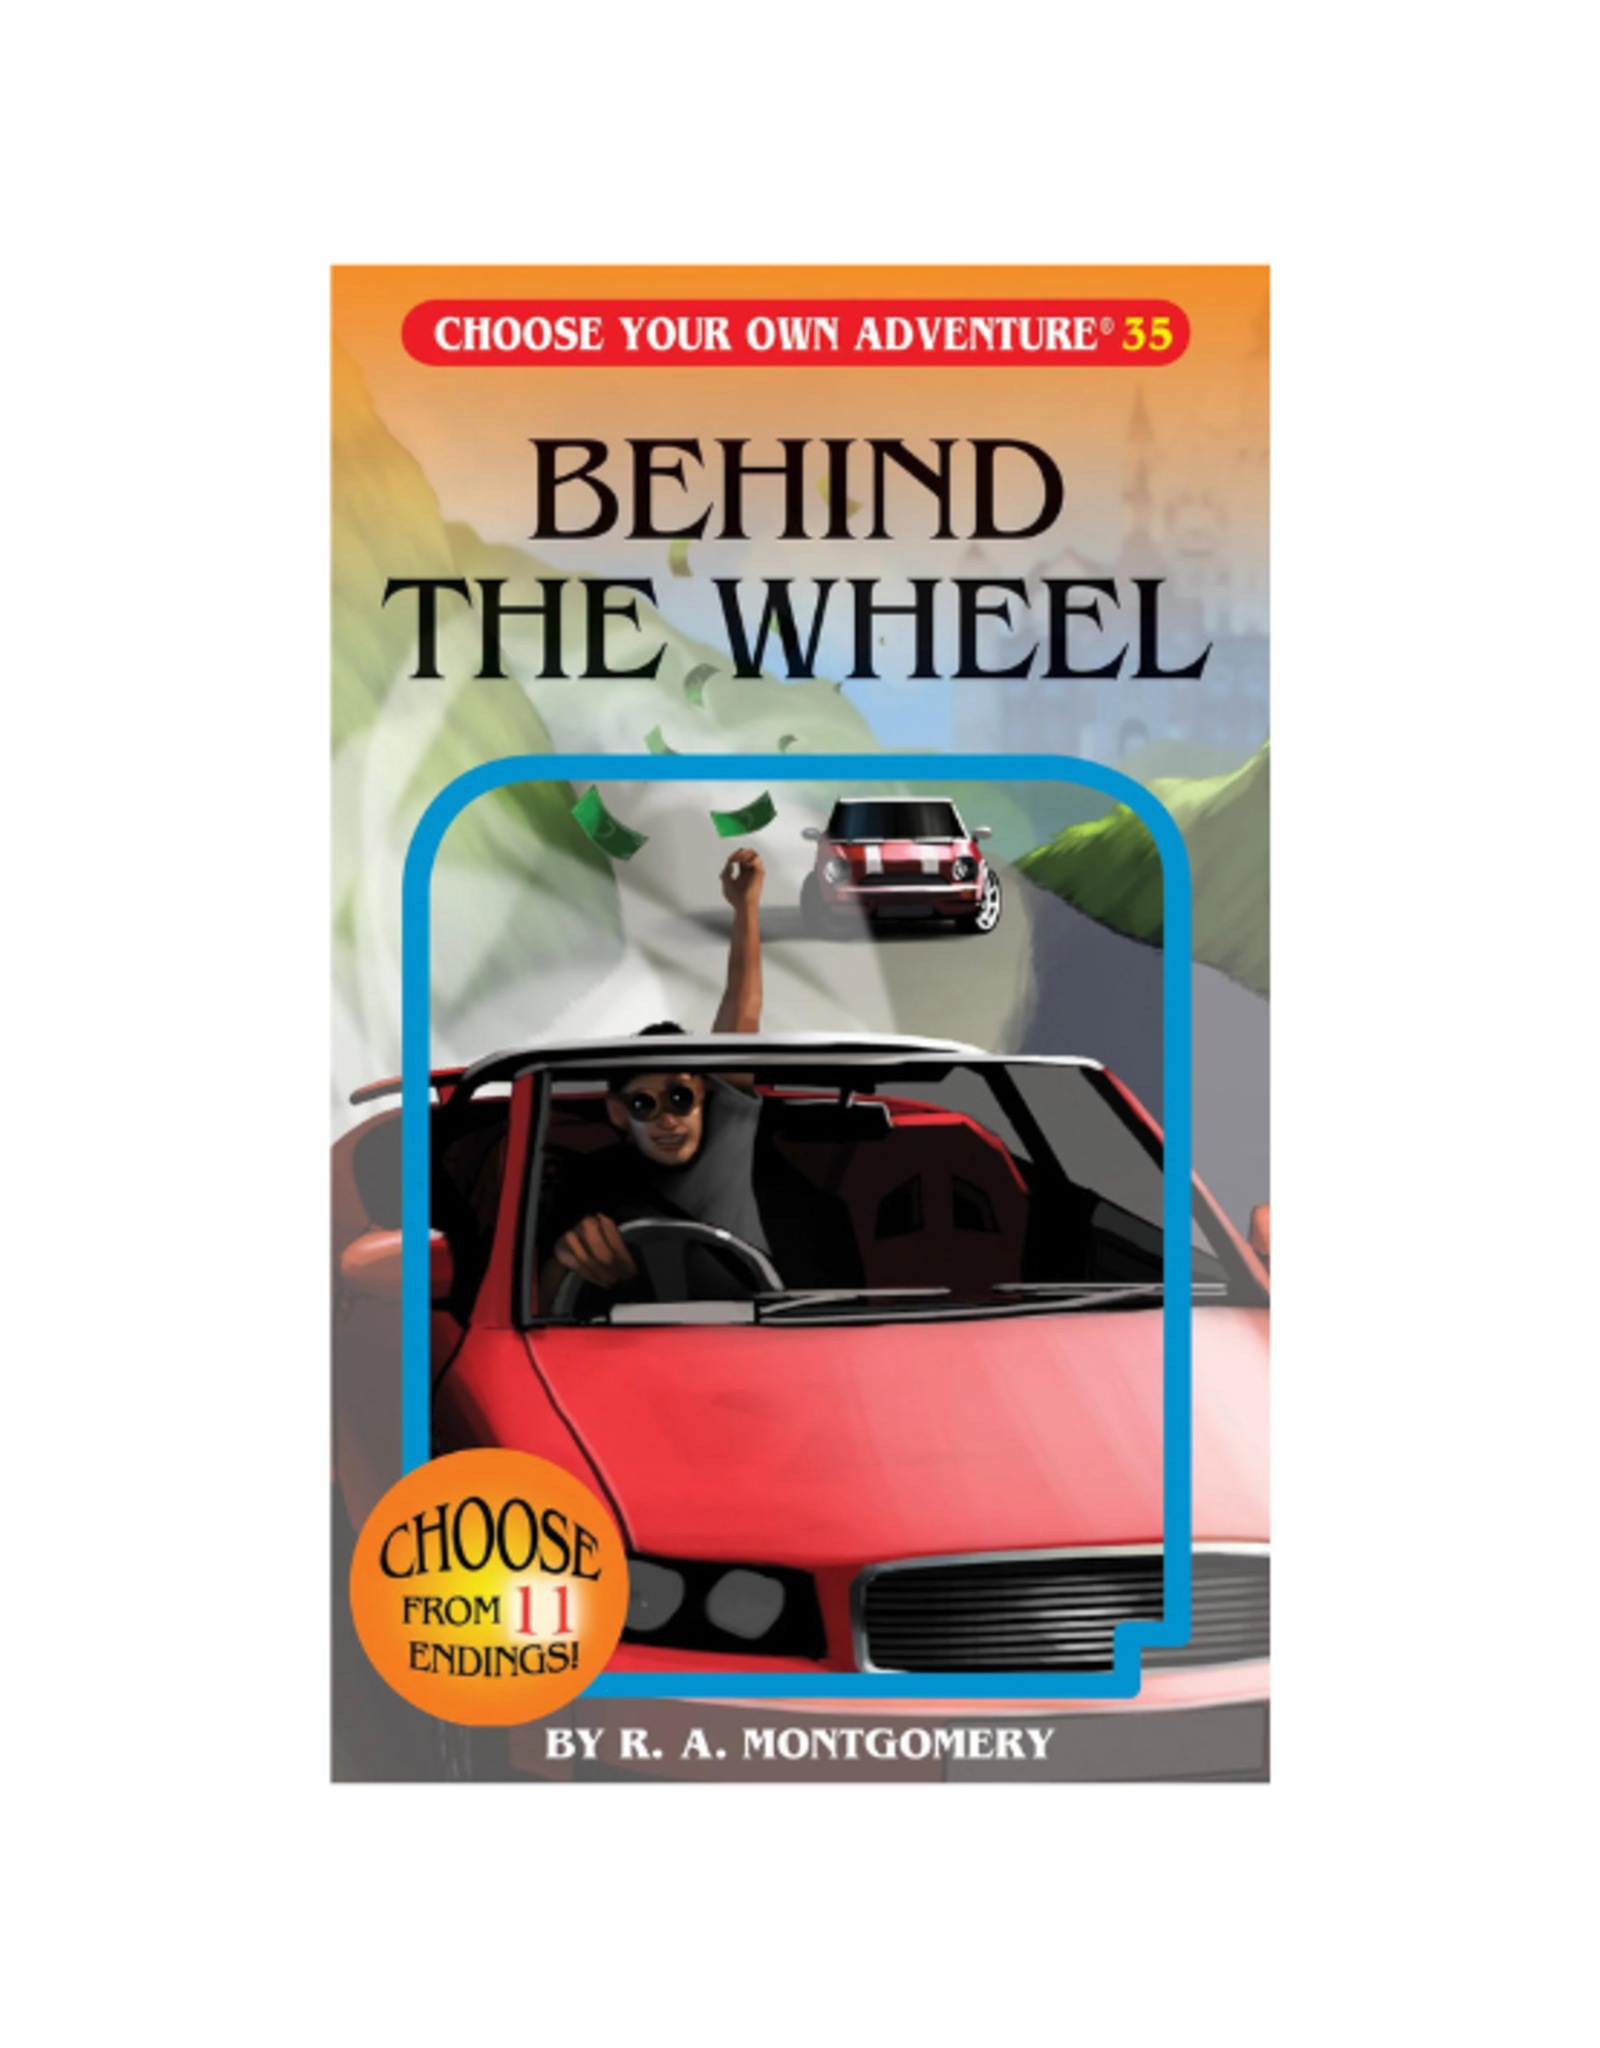 Choose Your Own Adventure Book - Choose Your Own Adventure - Behind the Wheel